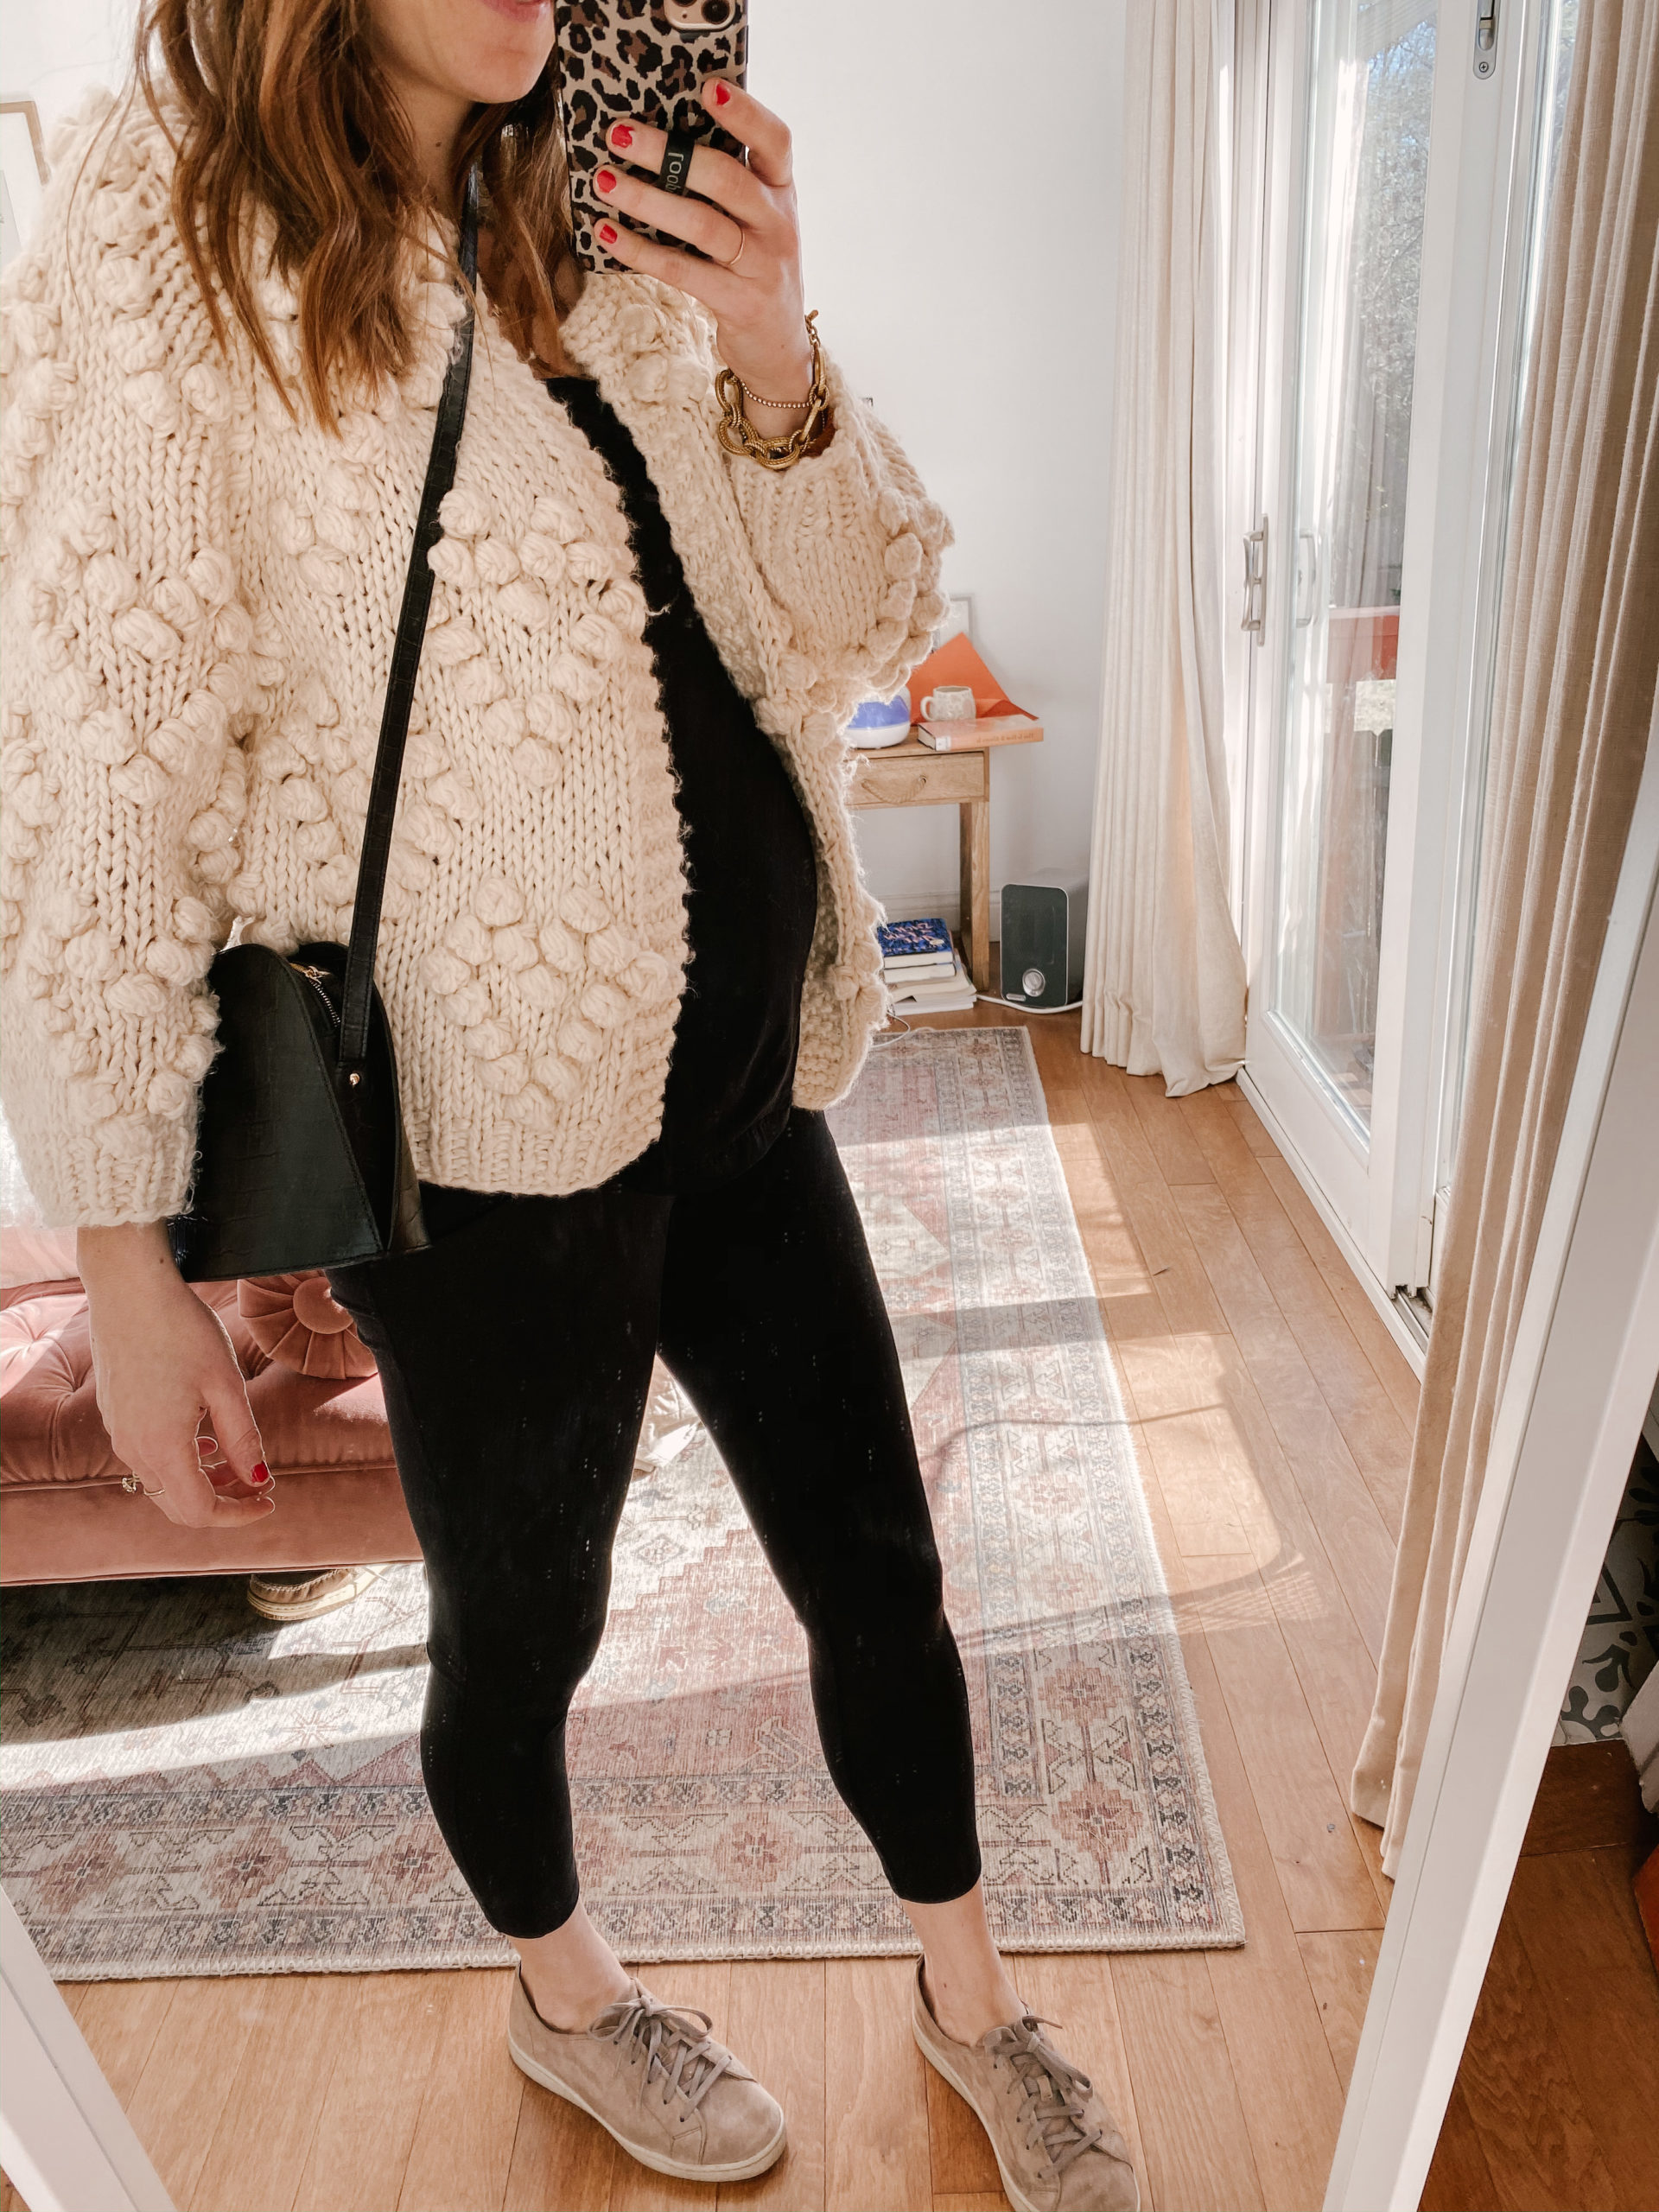 20 Maternity Outfit Ideas For Winter The Mama Notes